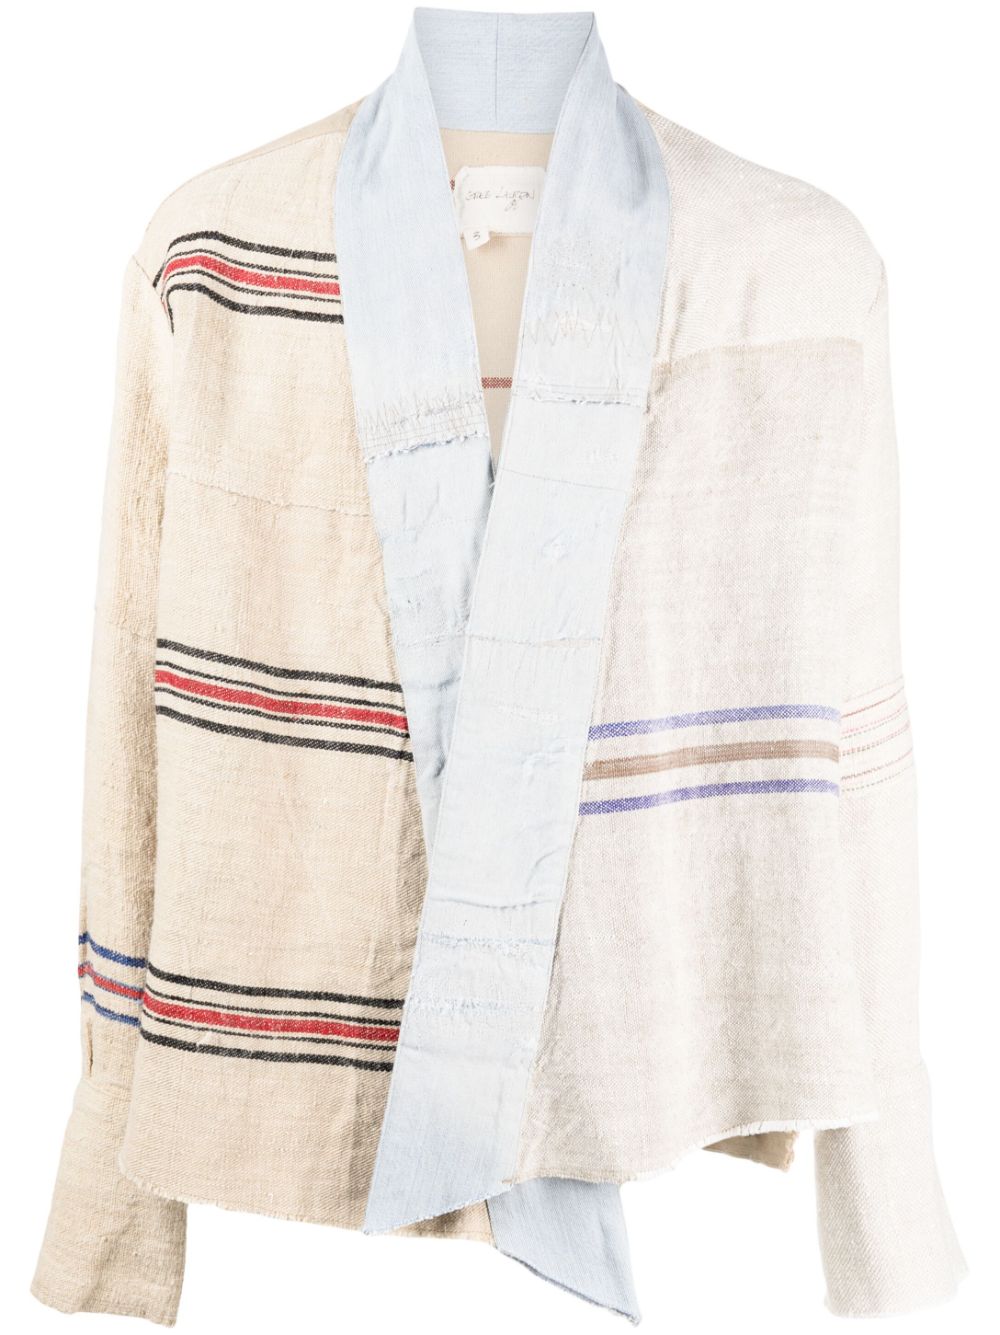 striped open-front shirt jacket